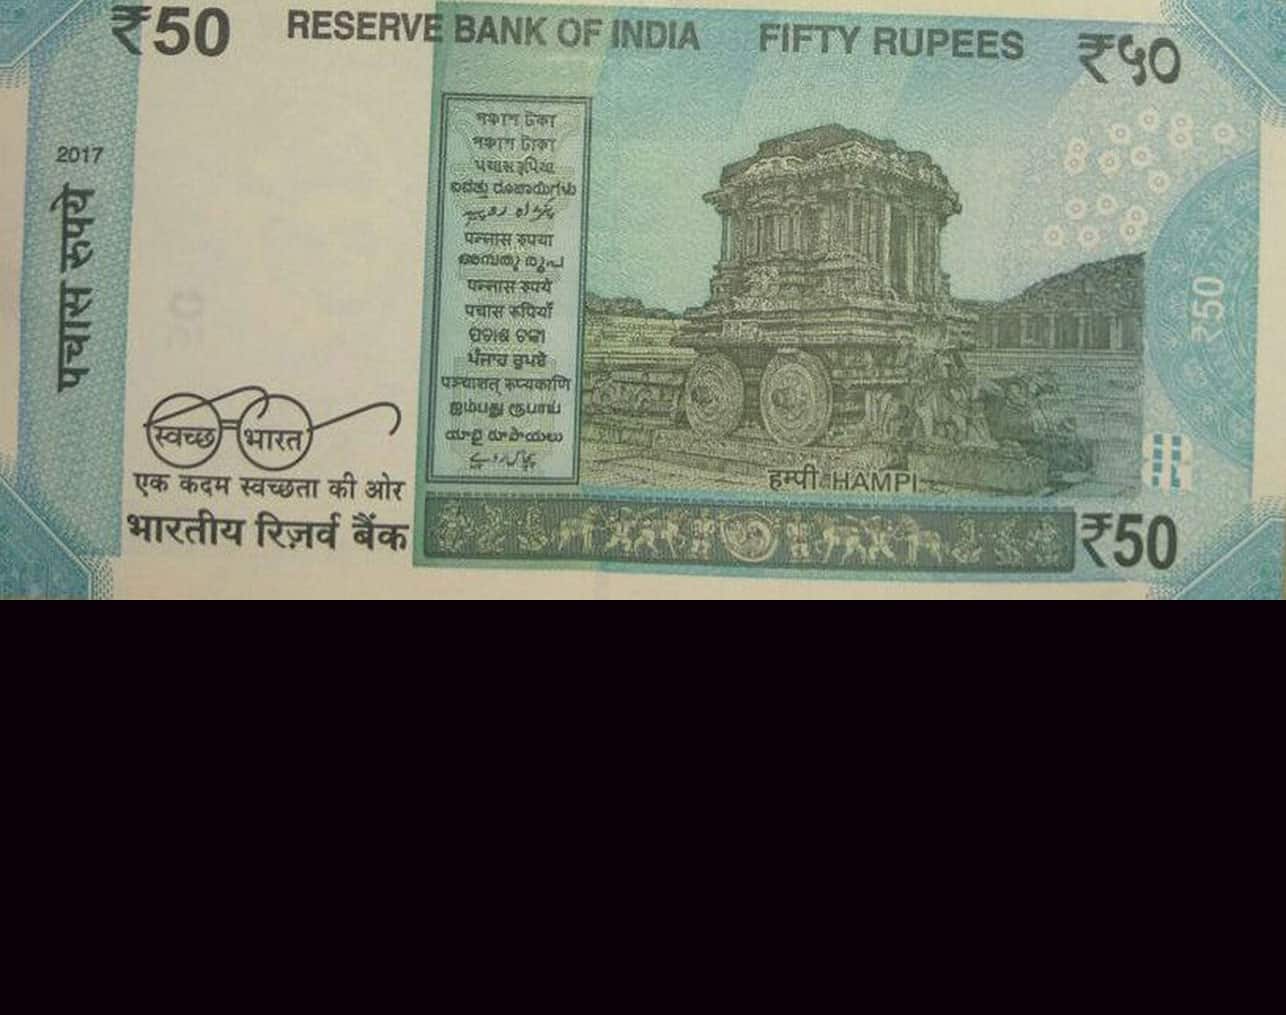 people wonder at the color of the new 50 note